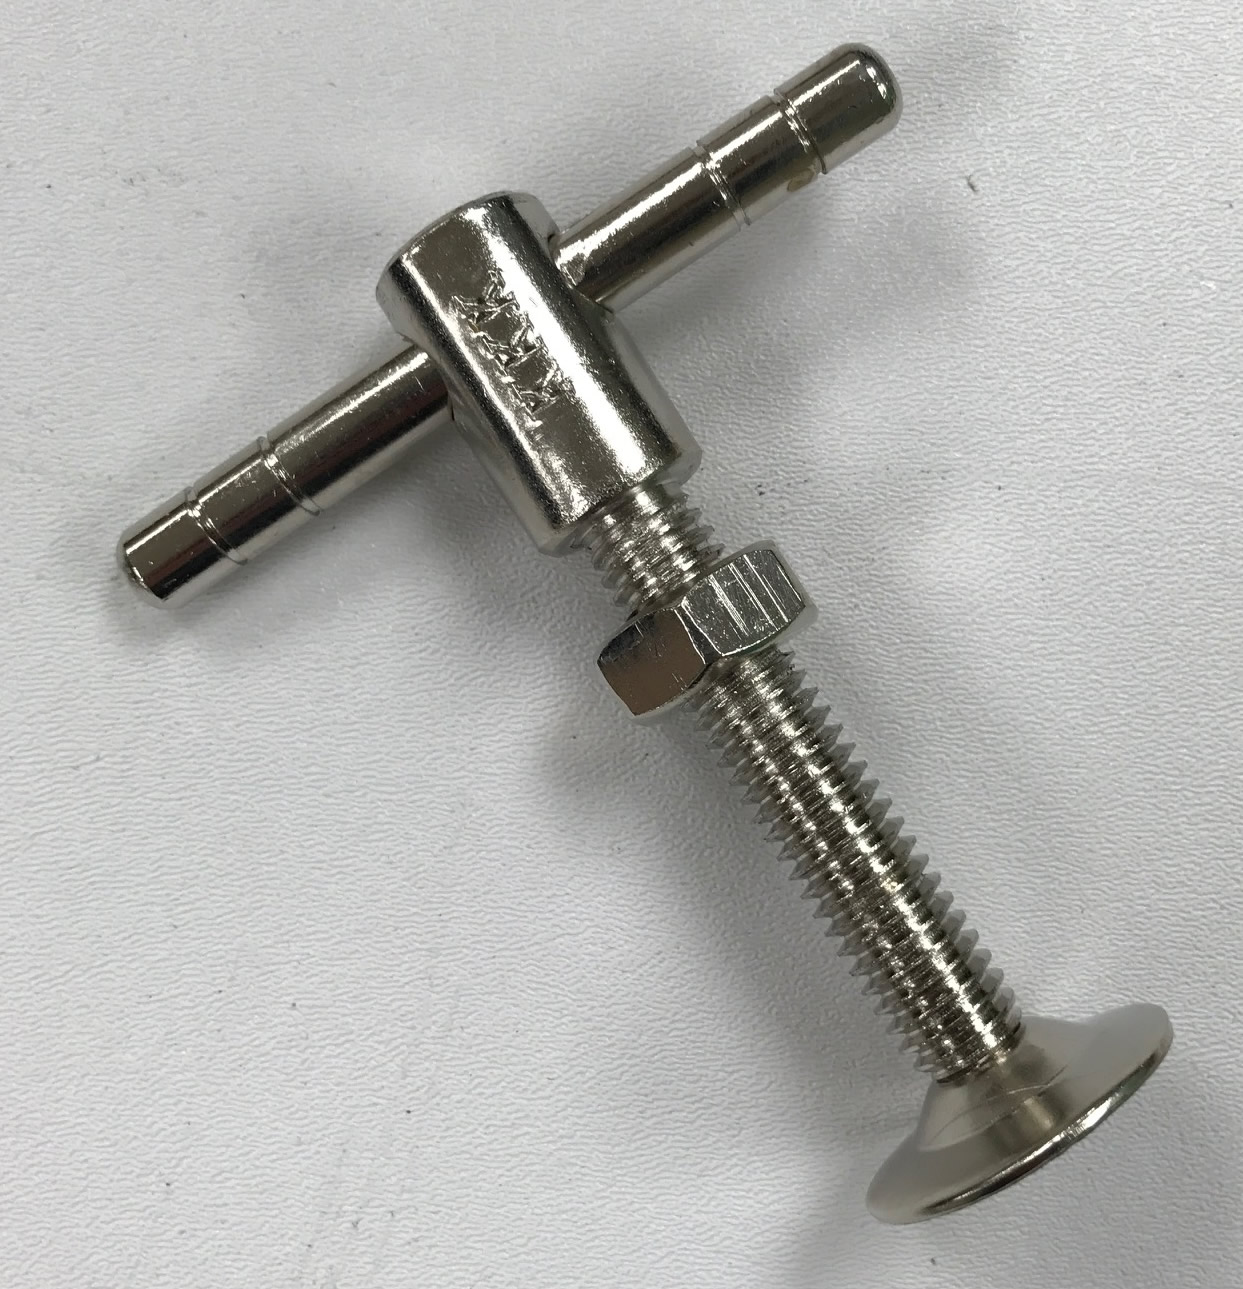 T STYLE WING BOLT FOR TRANSOM (ONE BOLT)